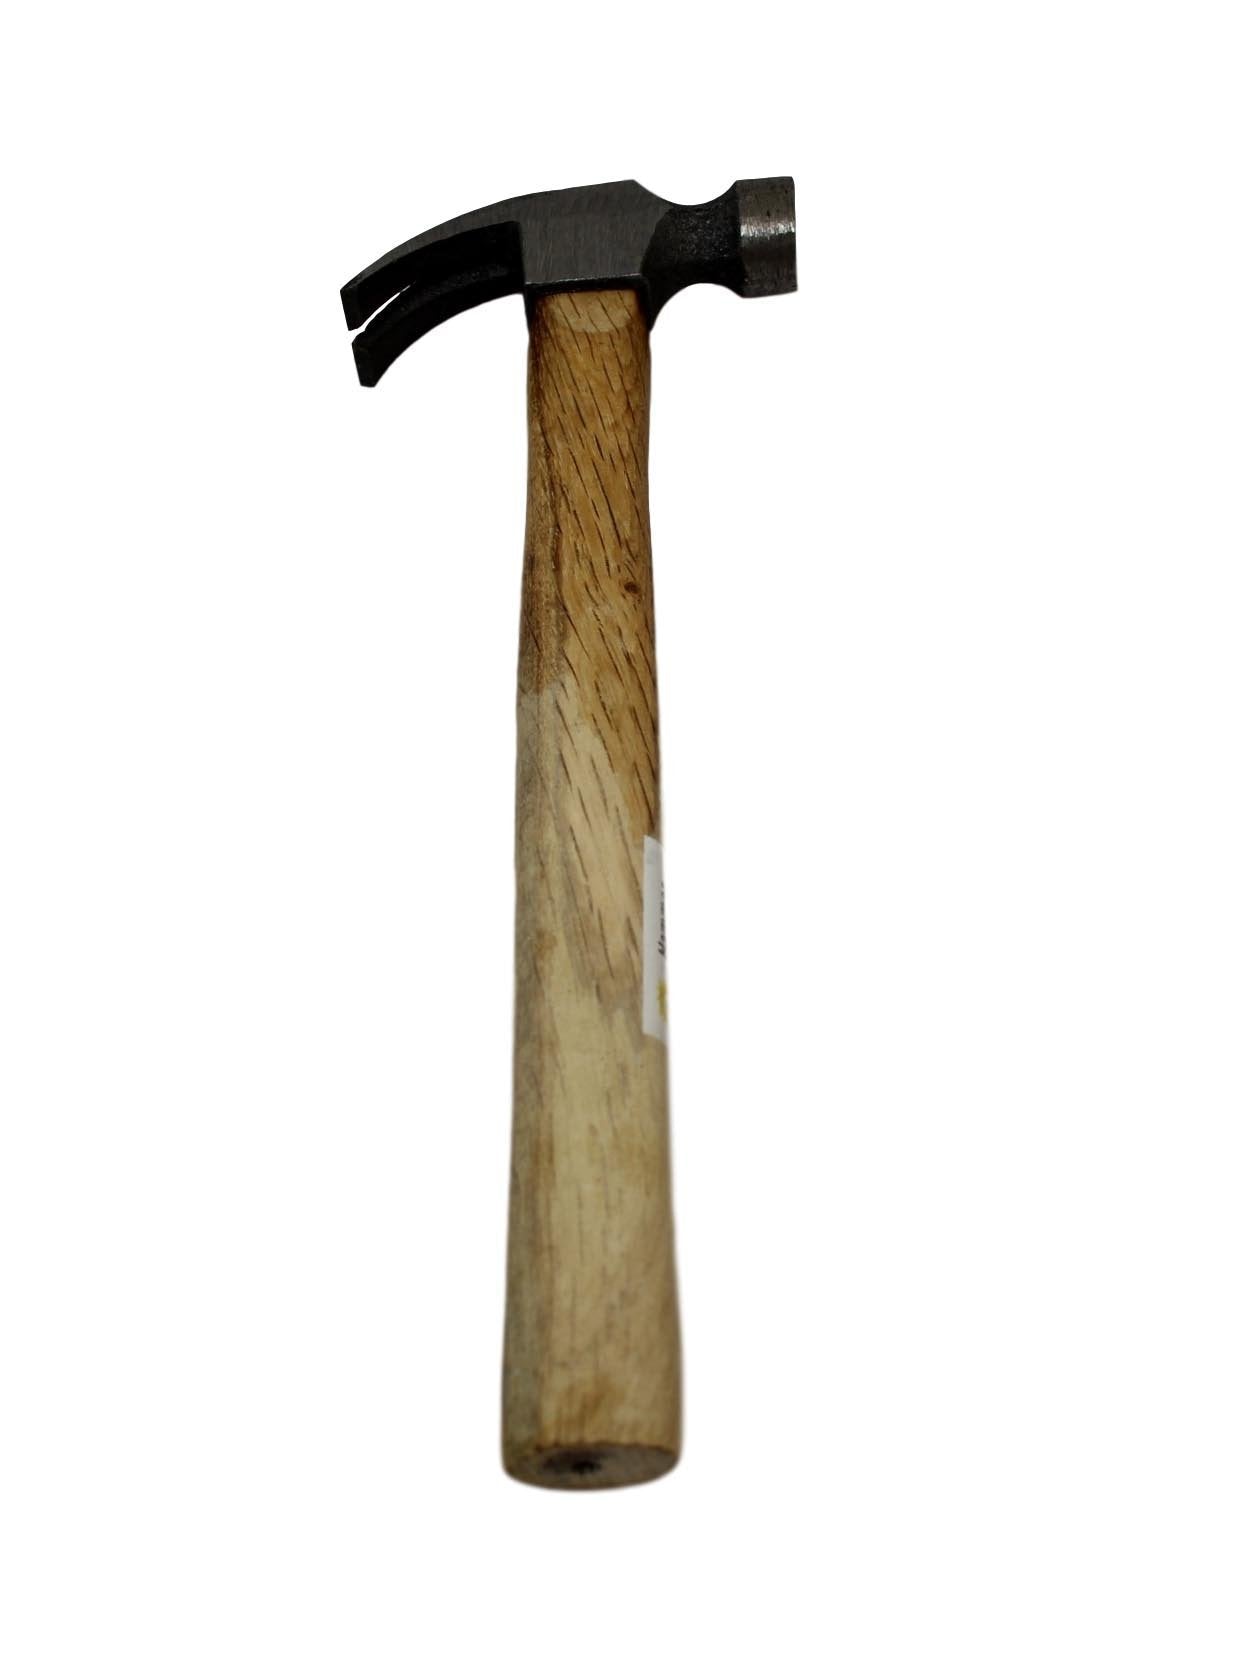 Wooden Big Hammer With Metal Top And Curve DIY General Use Hammer 29cm 5511 (Parcel Rate)